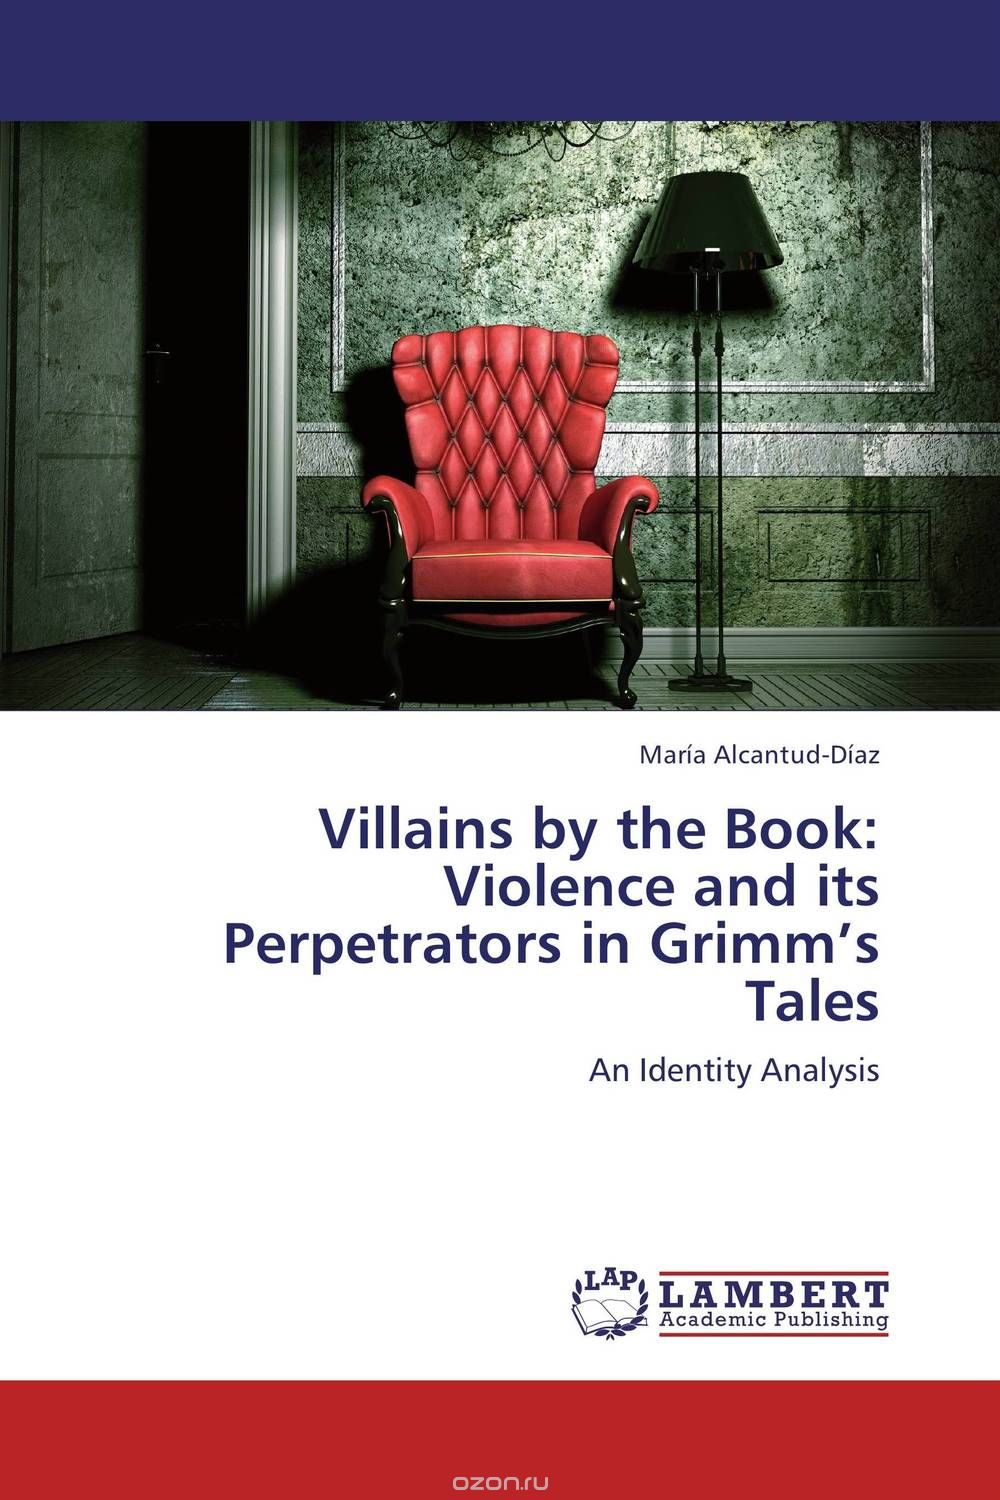 Скачать книгу "Villains by the Book: Violence and its Perpetrators in Grimm’s Tales"